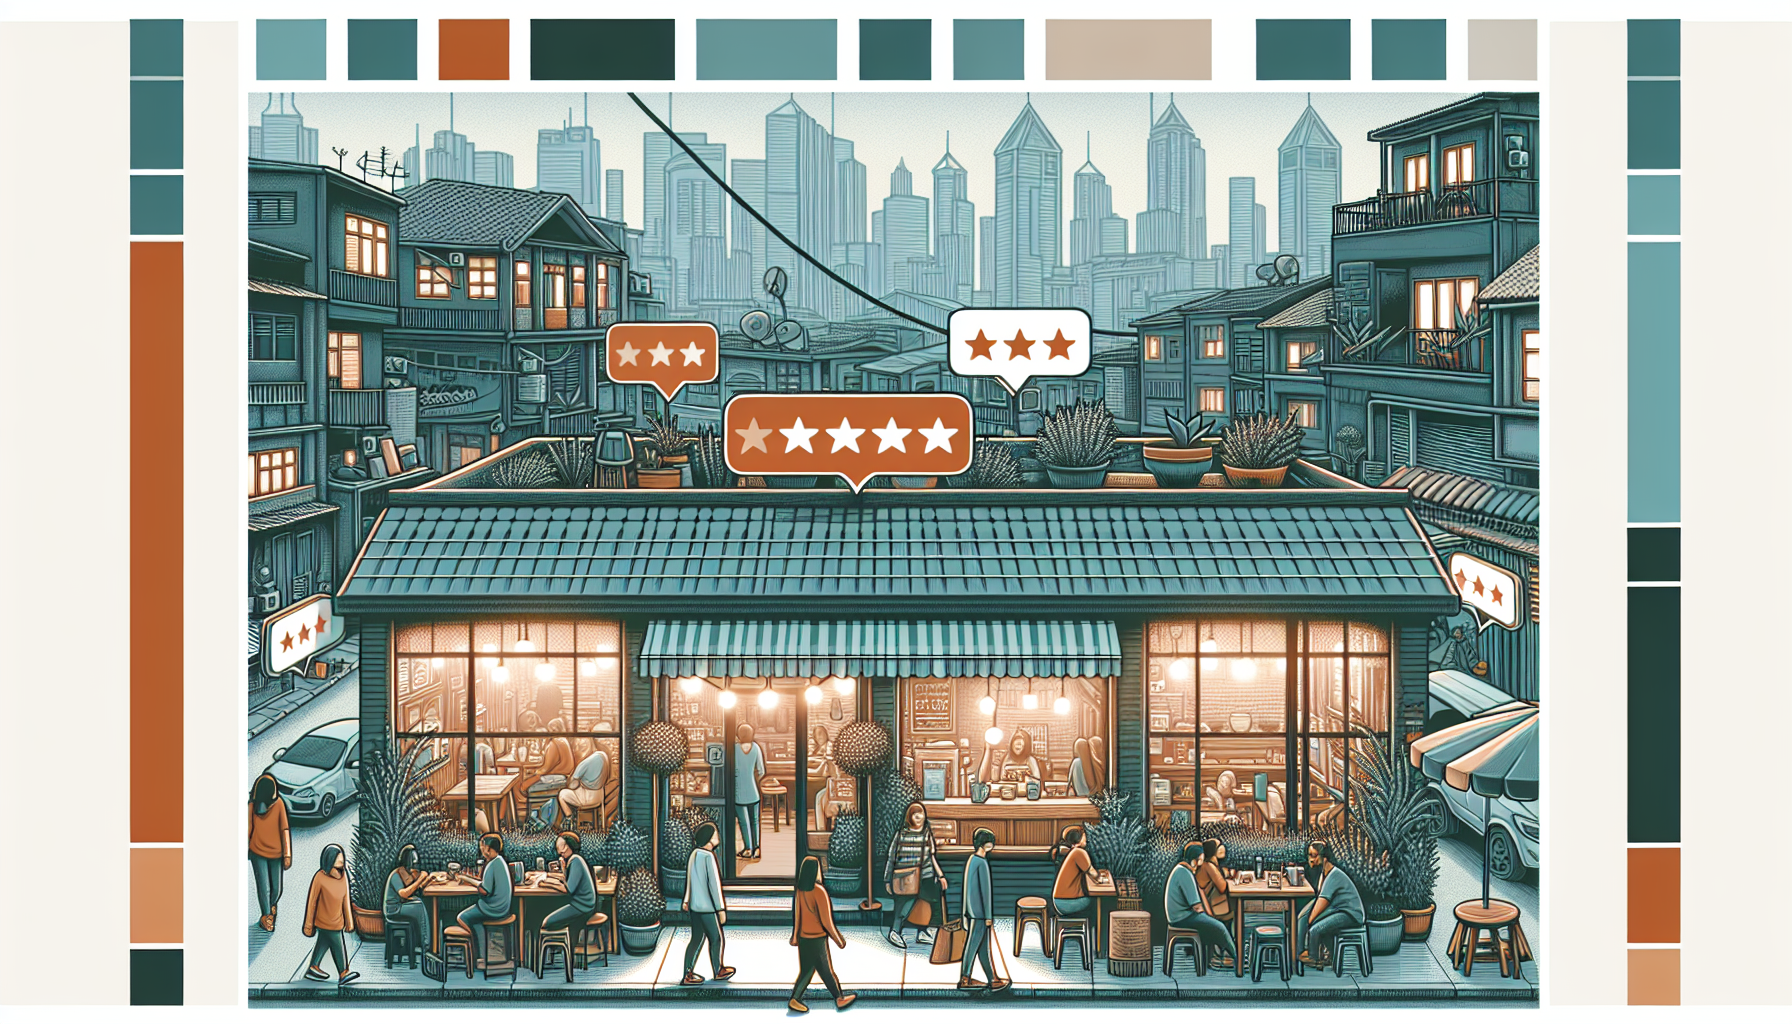 An illustrated guide showing a small cozy cafe bustling with satisfied customers, with visible five-star Yelp review notifications floating above the cafe, set in a vibrant, bustling city street scene